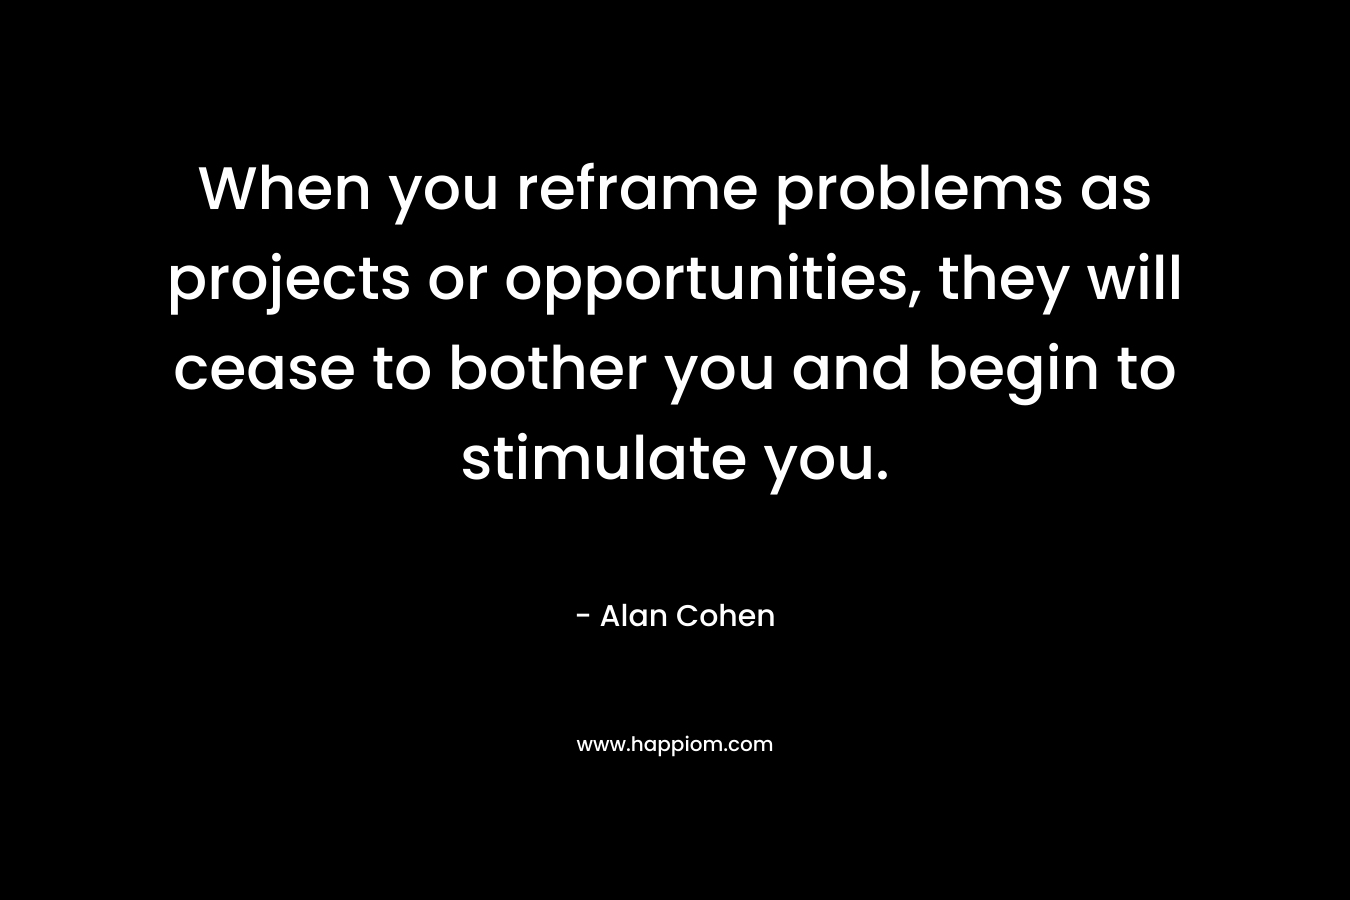 When you reframe problems as projects or opportunities, they will cease to bother you and begin to stimulate you. – Alan Cohen